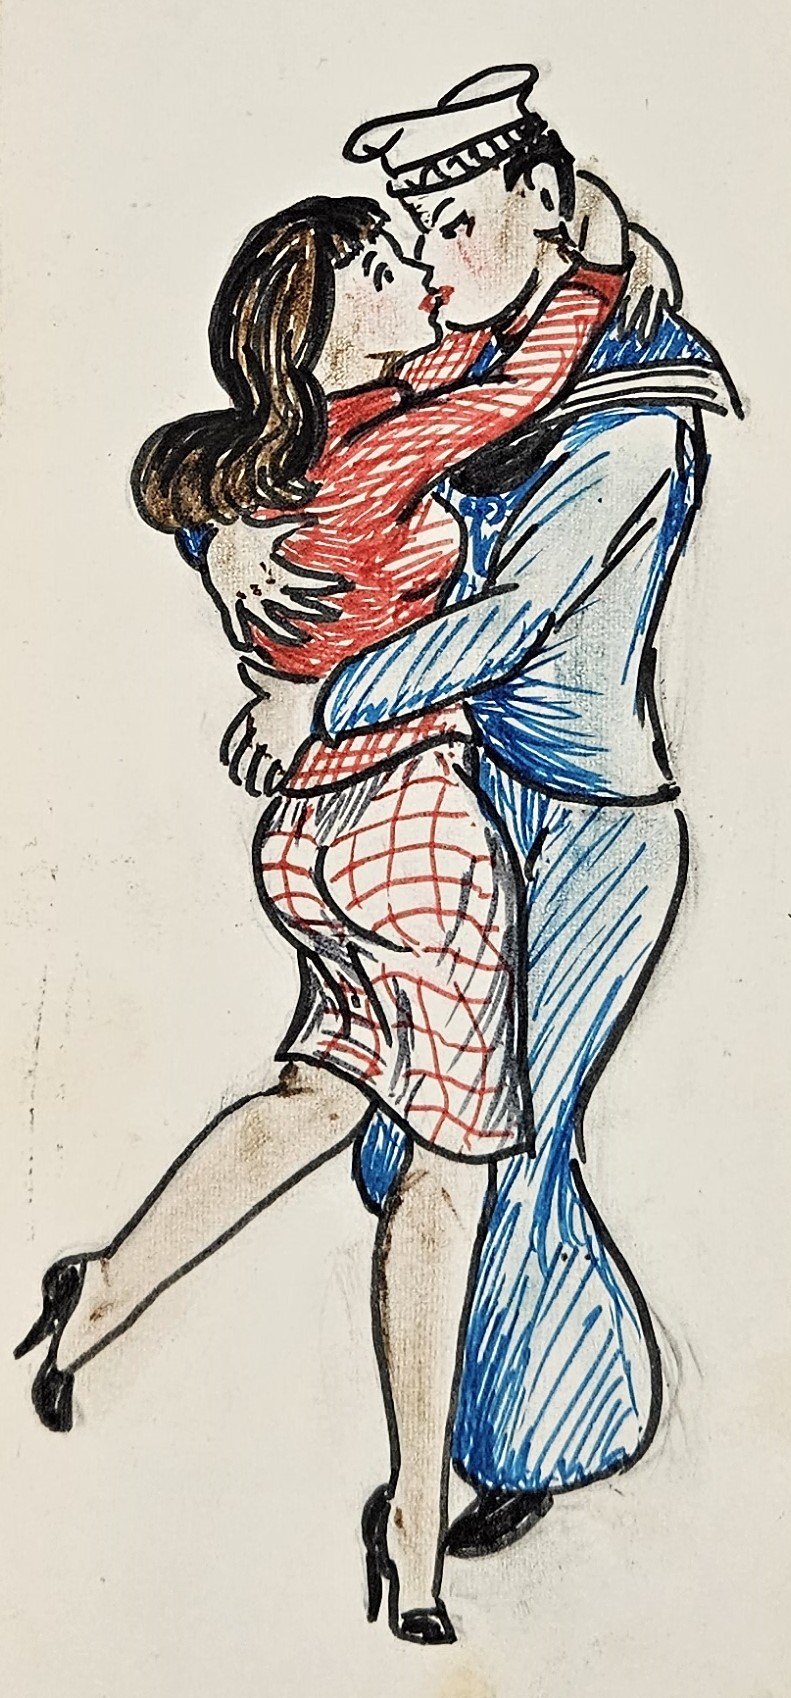 A design of a woman in a red jacket and a white and red check skirt embracing with a sailor man in a kiss